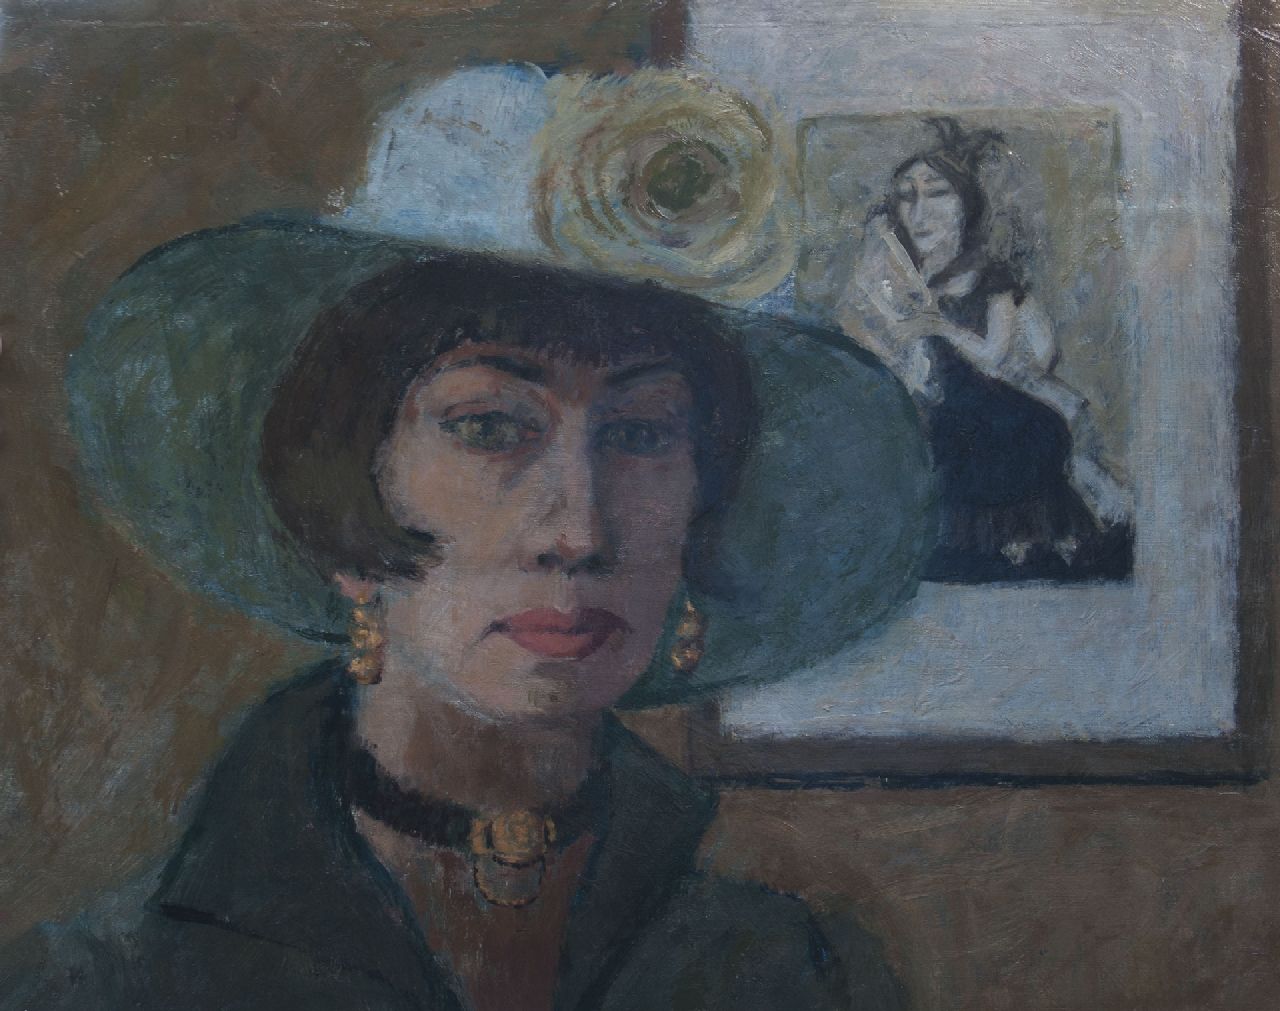 Pot B.  | Basje Pot, Lady in a green hat, oil on canvas laid down on panel 50.2 x 60.8 cm